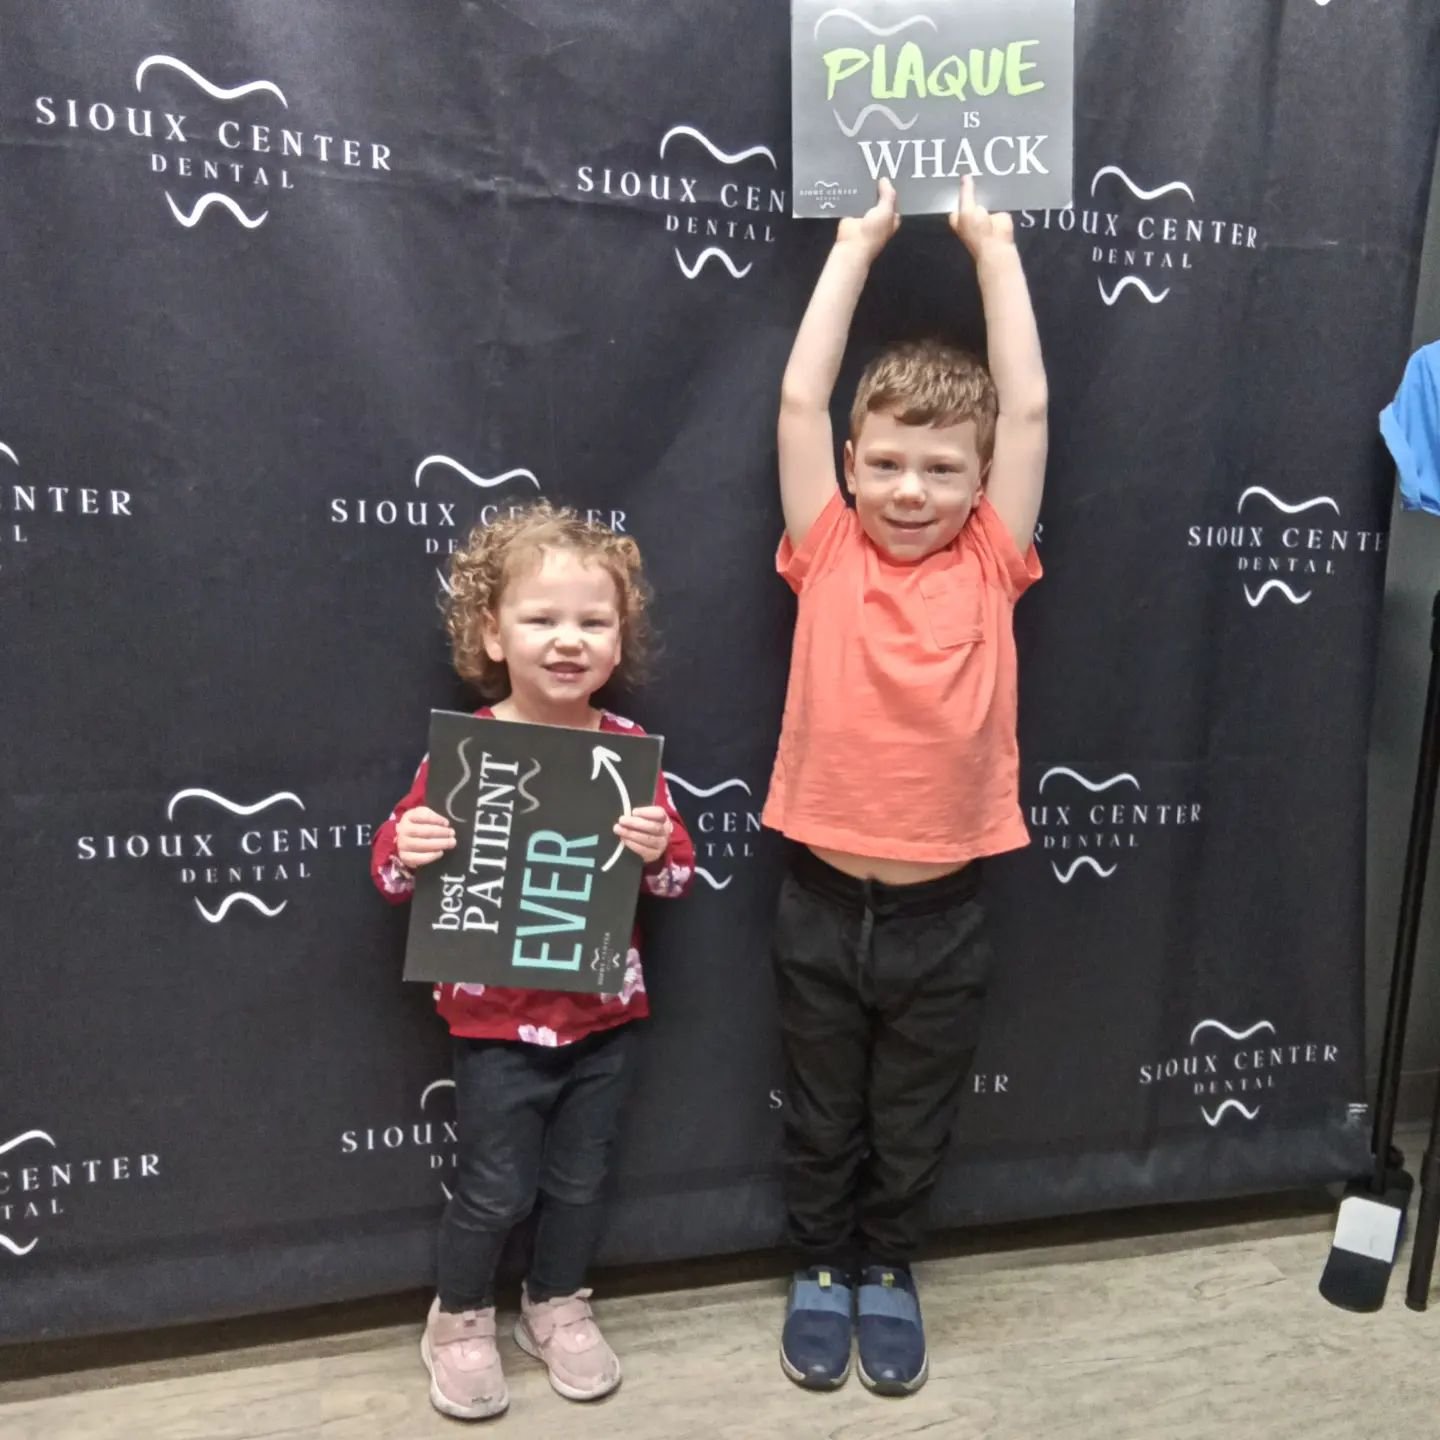 Hattie and Graham were in to see us and they had an awesome visit! 🎉 We are thrilled to report that they are both members of our ⭐No Cavity Club⭐! 🥇 Way to go, kids! 👏👏👏 Keep up the great brushing! 😎🦷👍
.
.
.
#siouxcenterdental 
#faithfamilyse